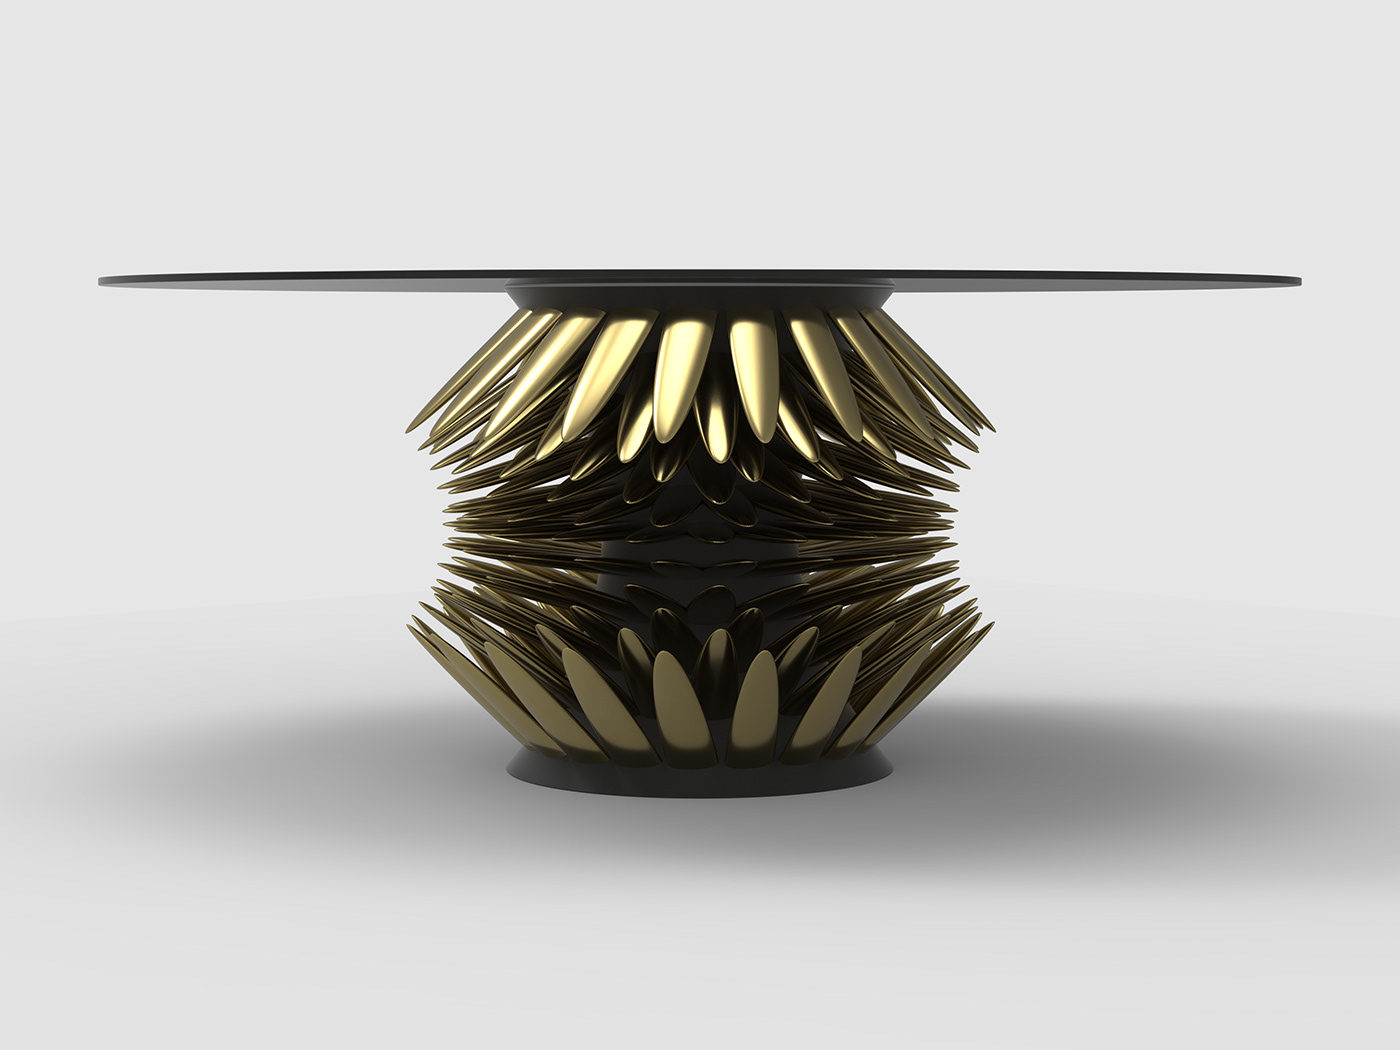 spine quill table furniture jason phillips design modern metal glass jason phillips jasonphillipsdesign